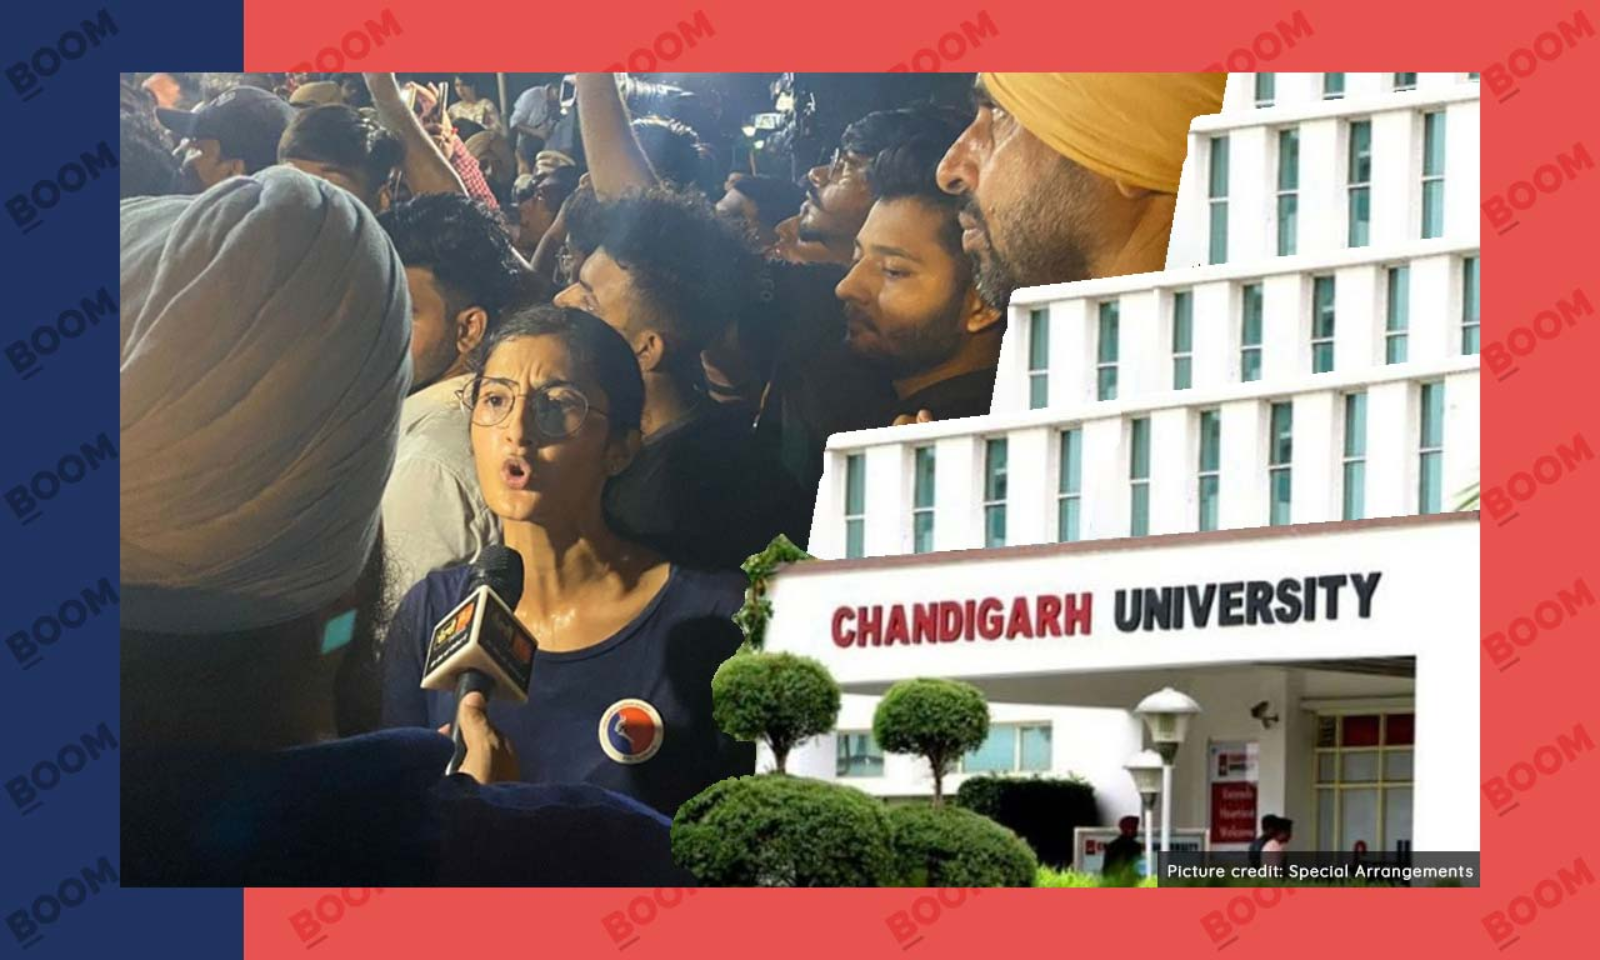 Students Xvideo Gujarati - What Was The 'Leaked' Video That Led To Chandigarh University Protest? |  BOOM